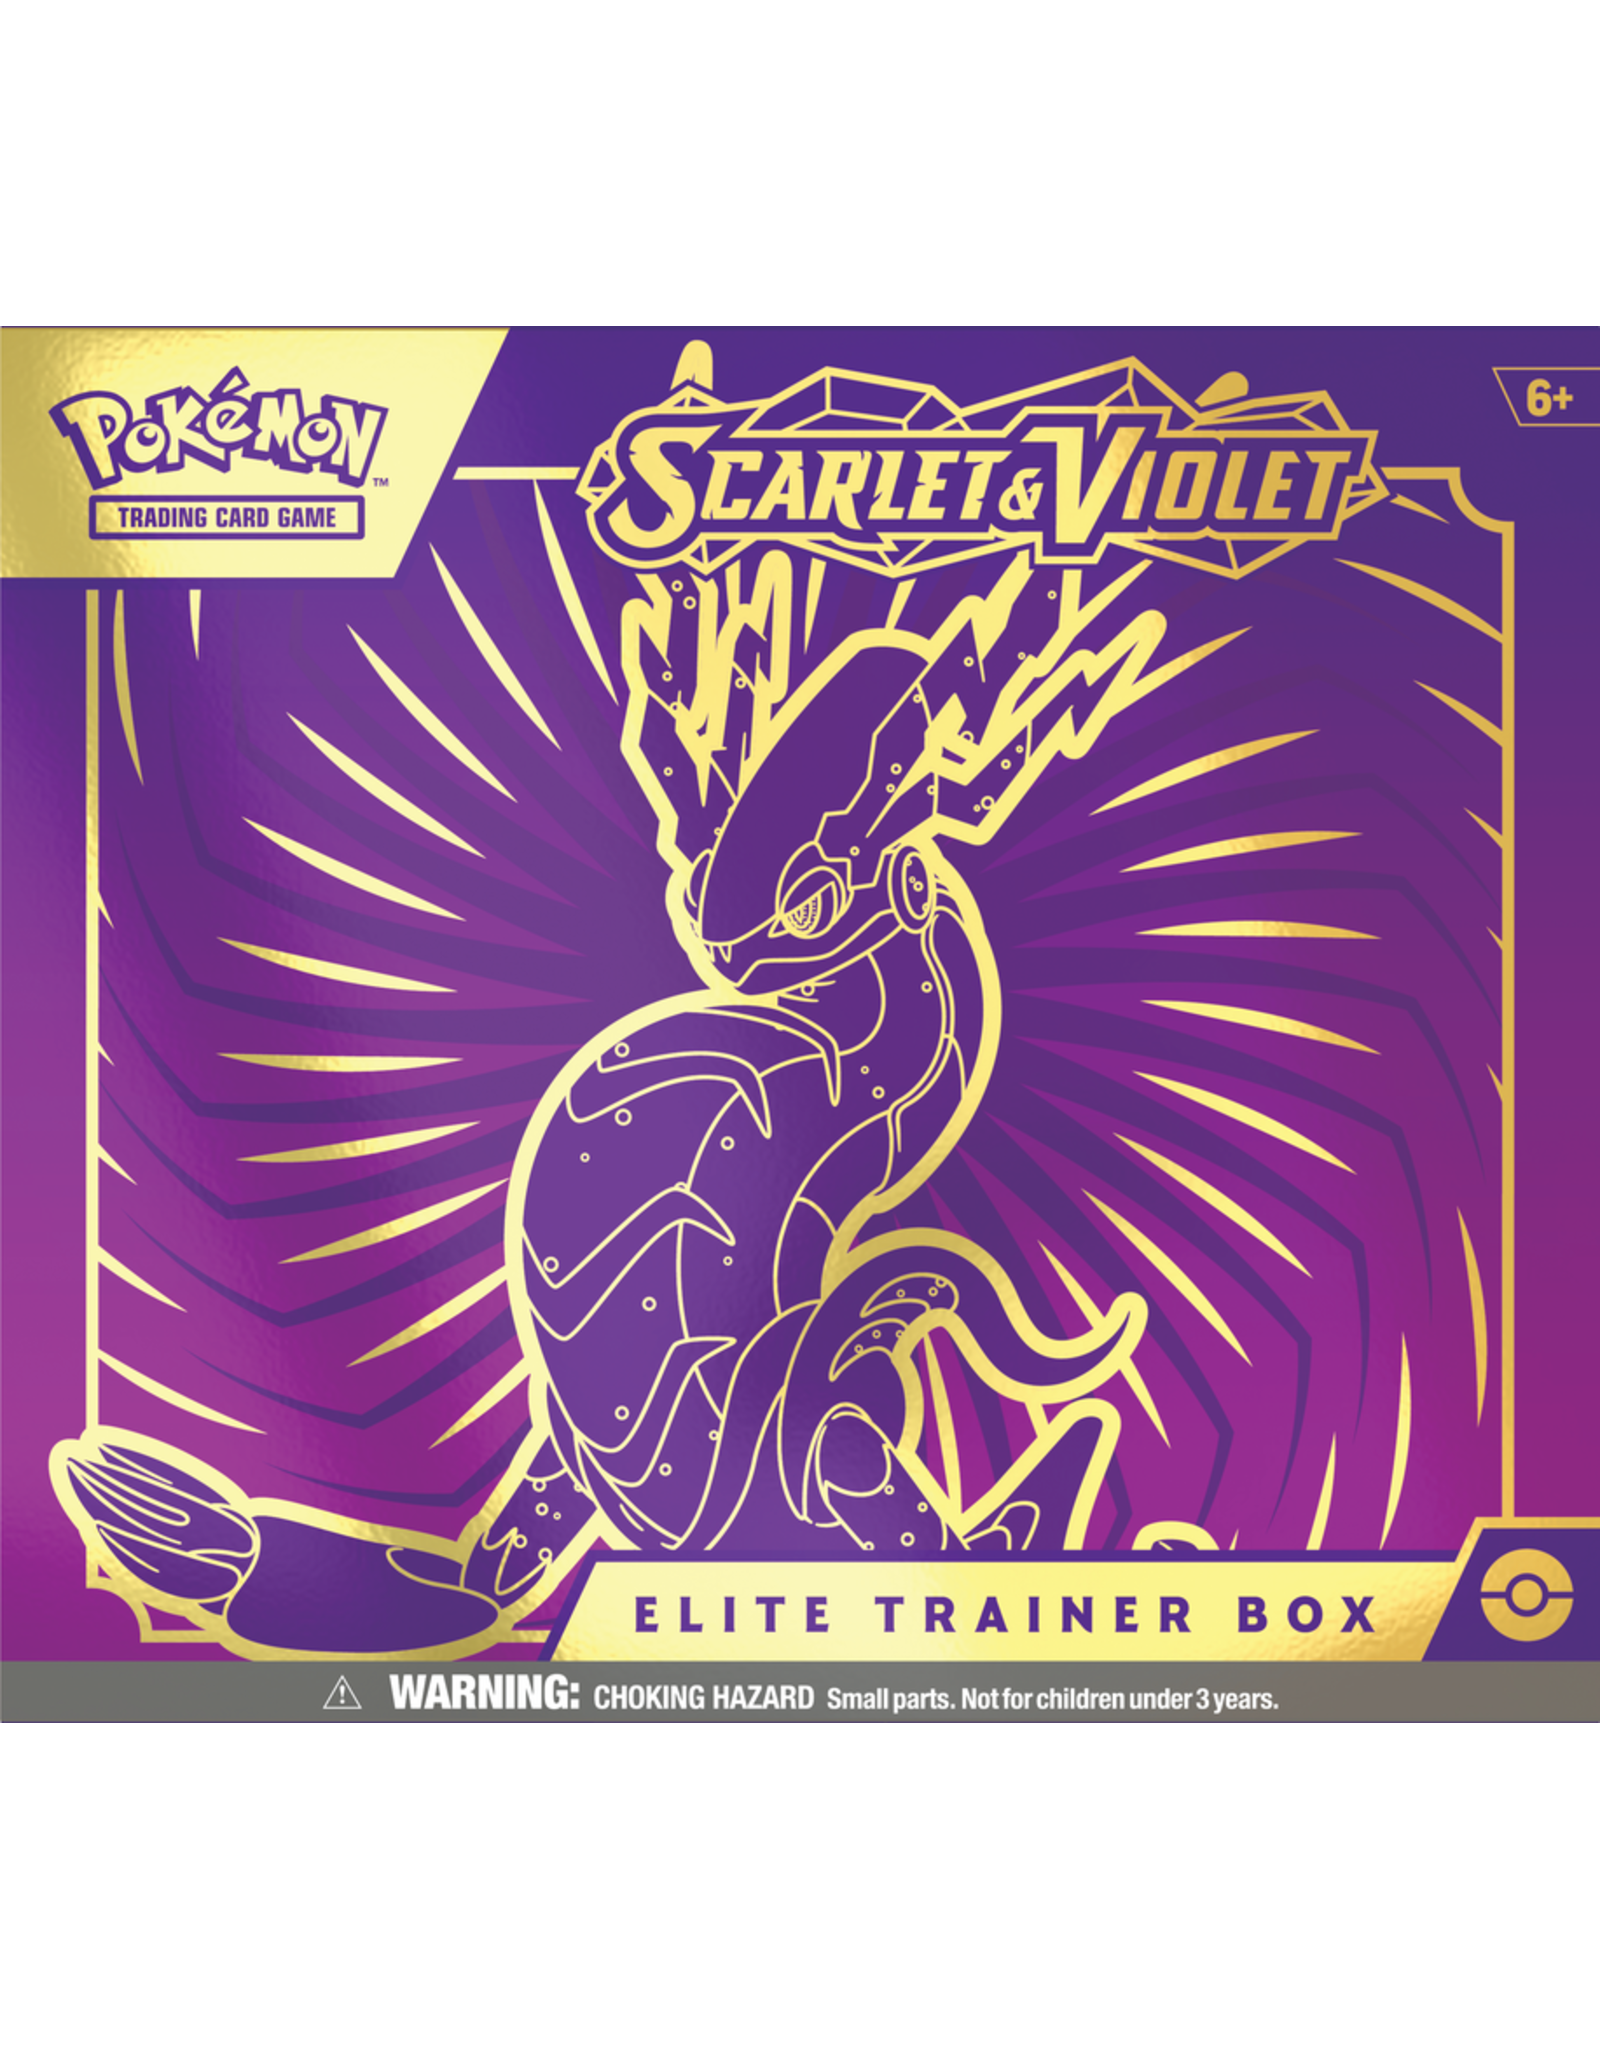 Pokemon Scarlet and Violet Elite Trainer Box (available March 31)